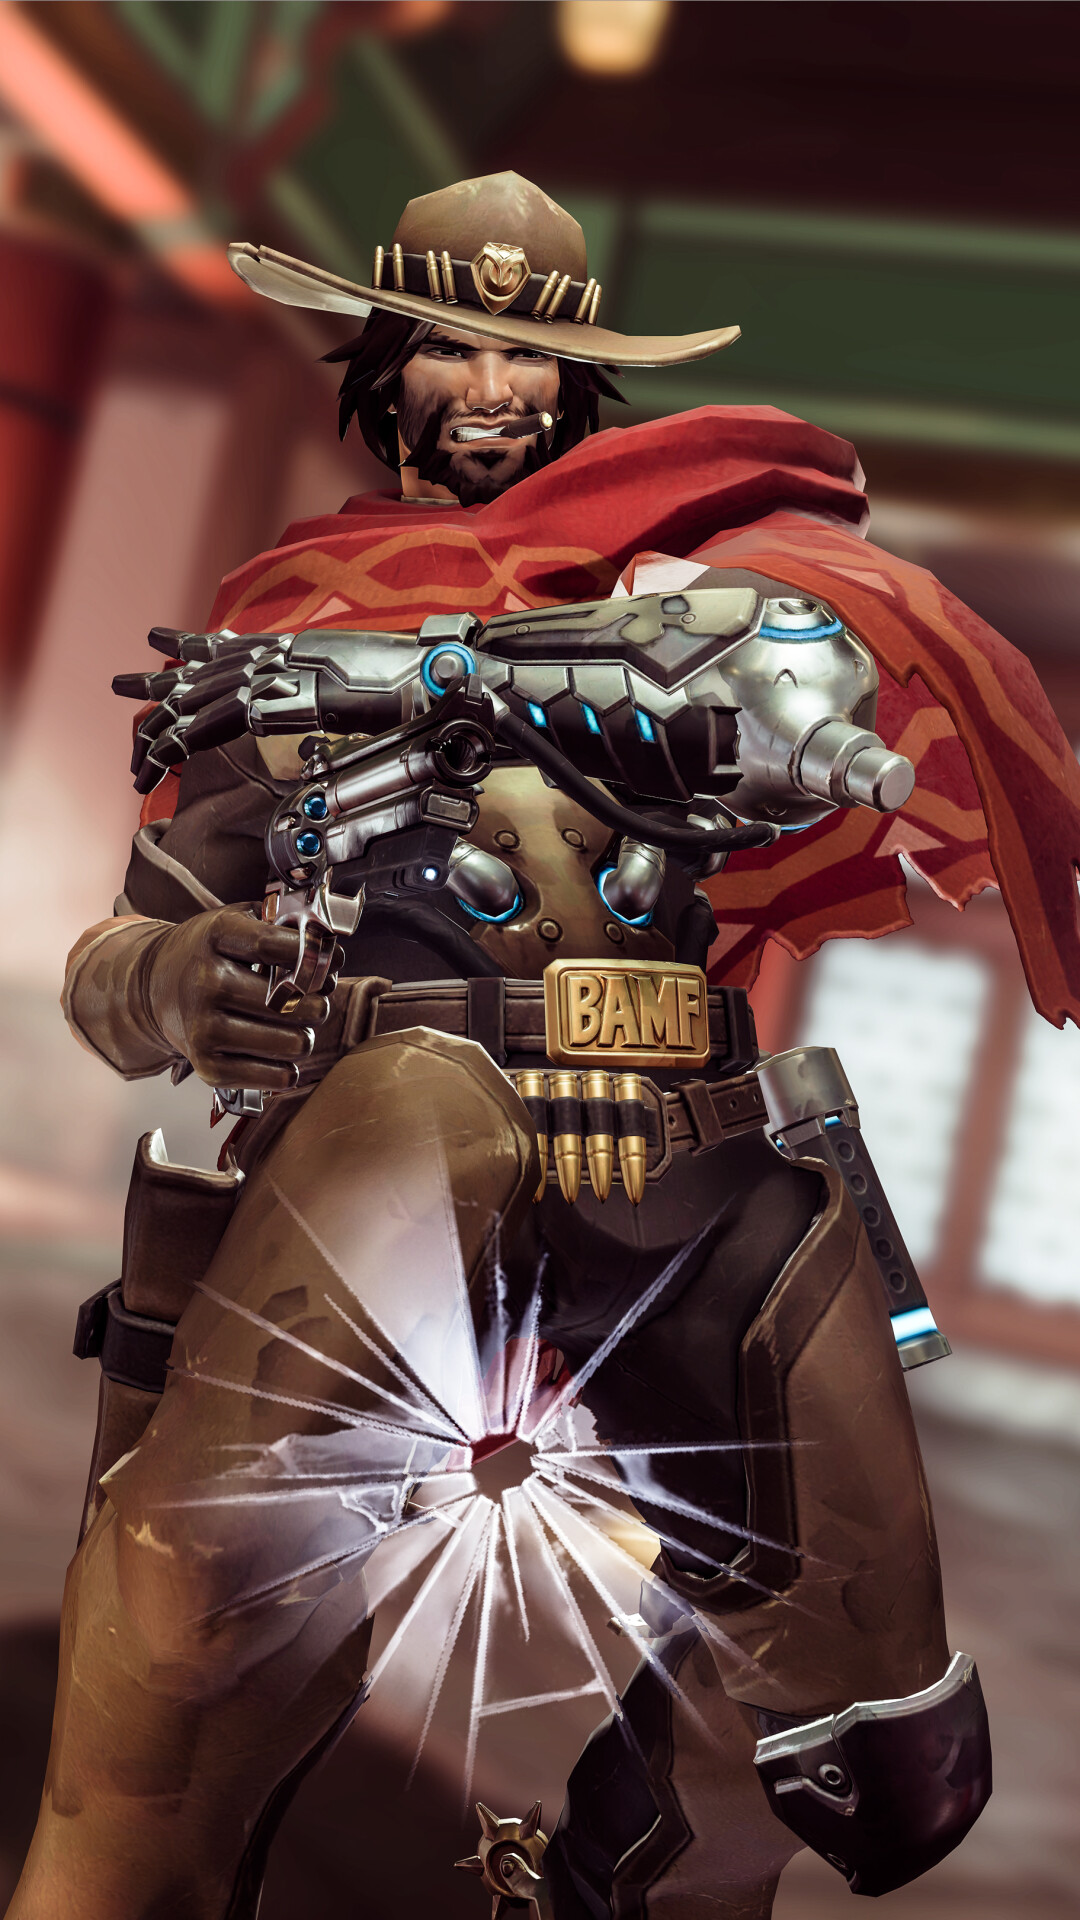 Overwatch: Cole Cassidy, Known as Jesse McCree, A Damage hero. 1080x1920 Full HD Background.